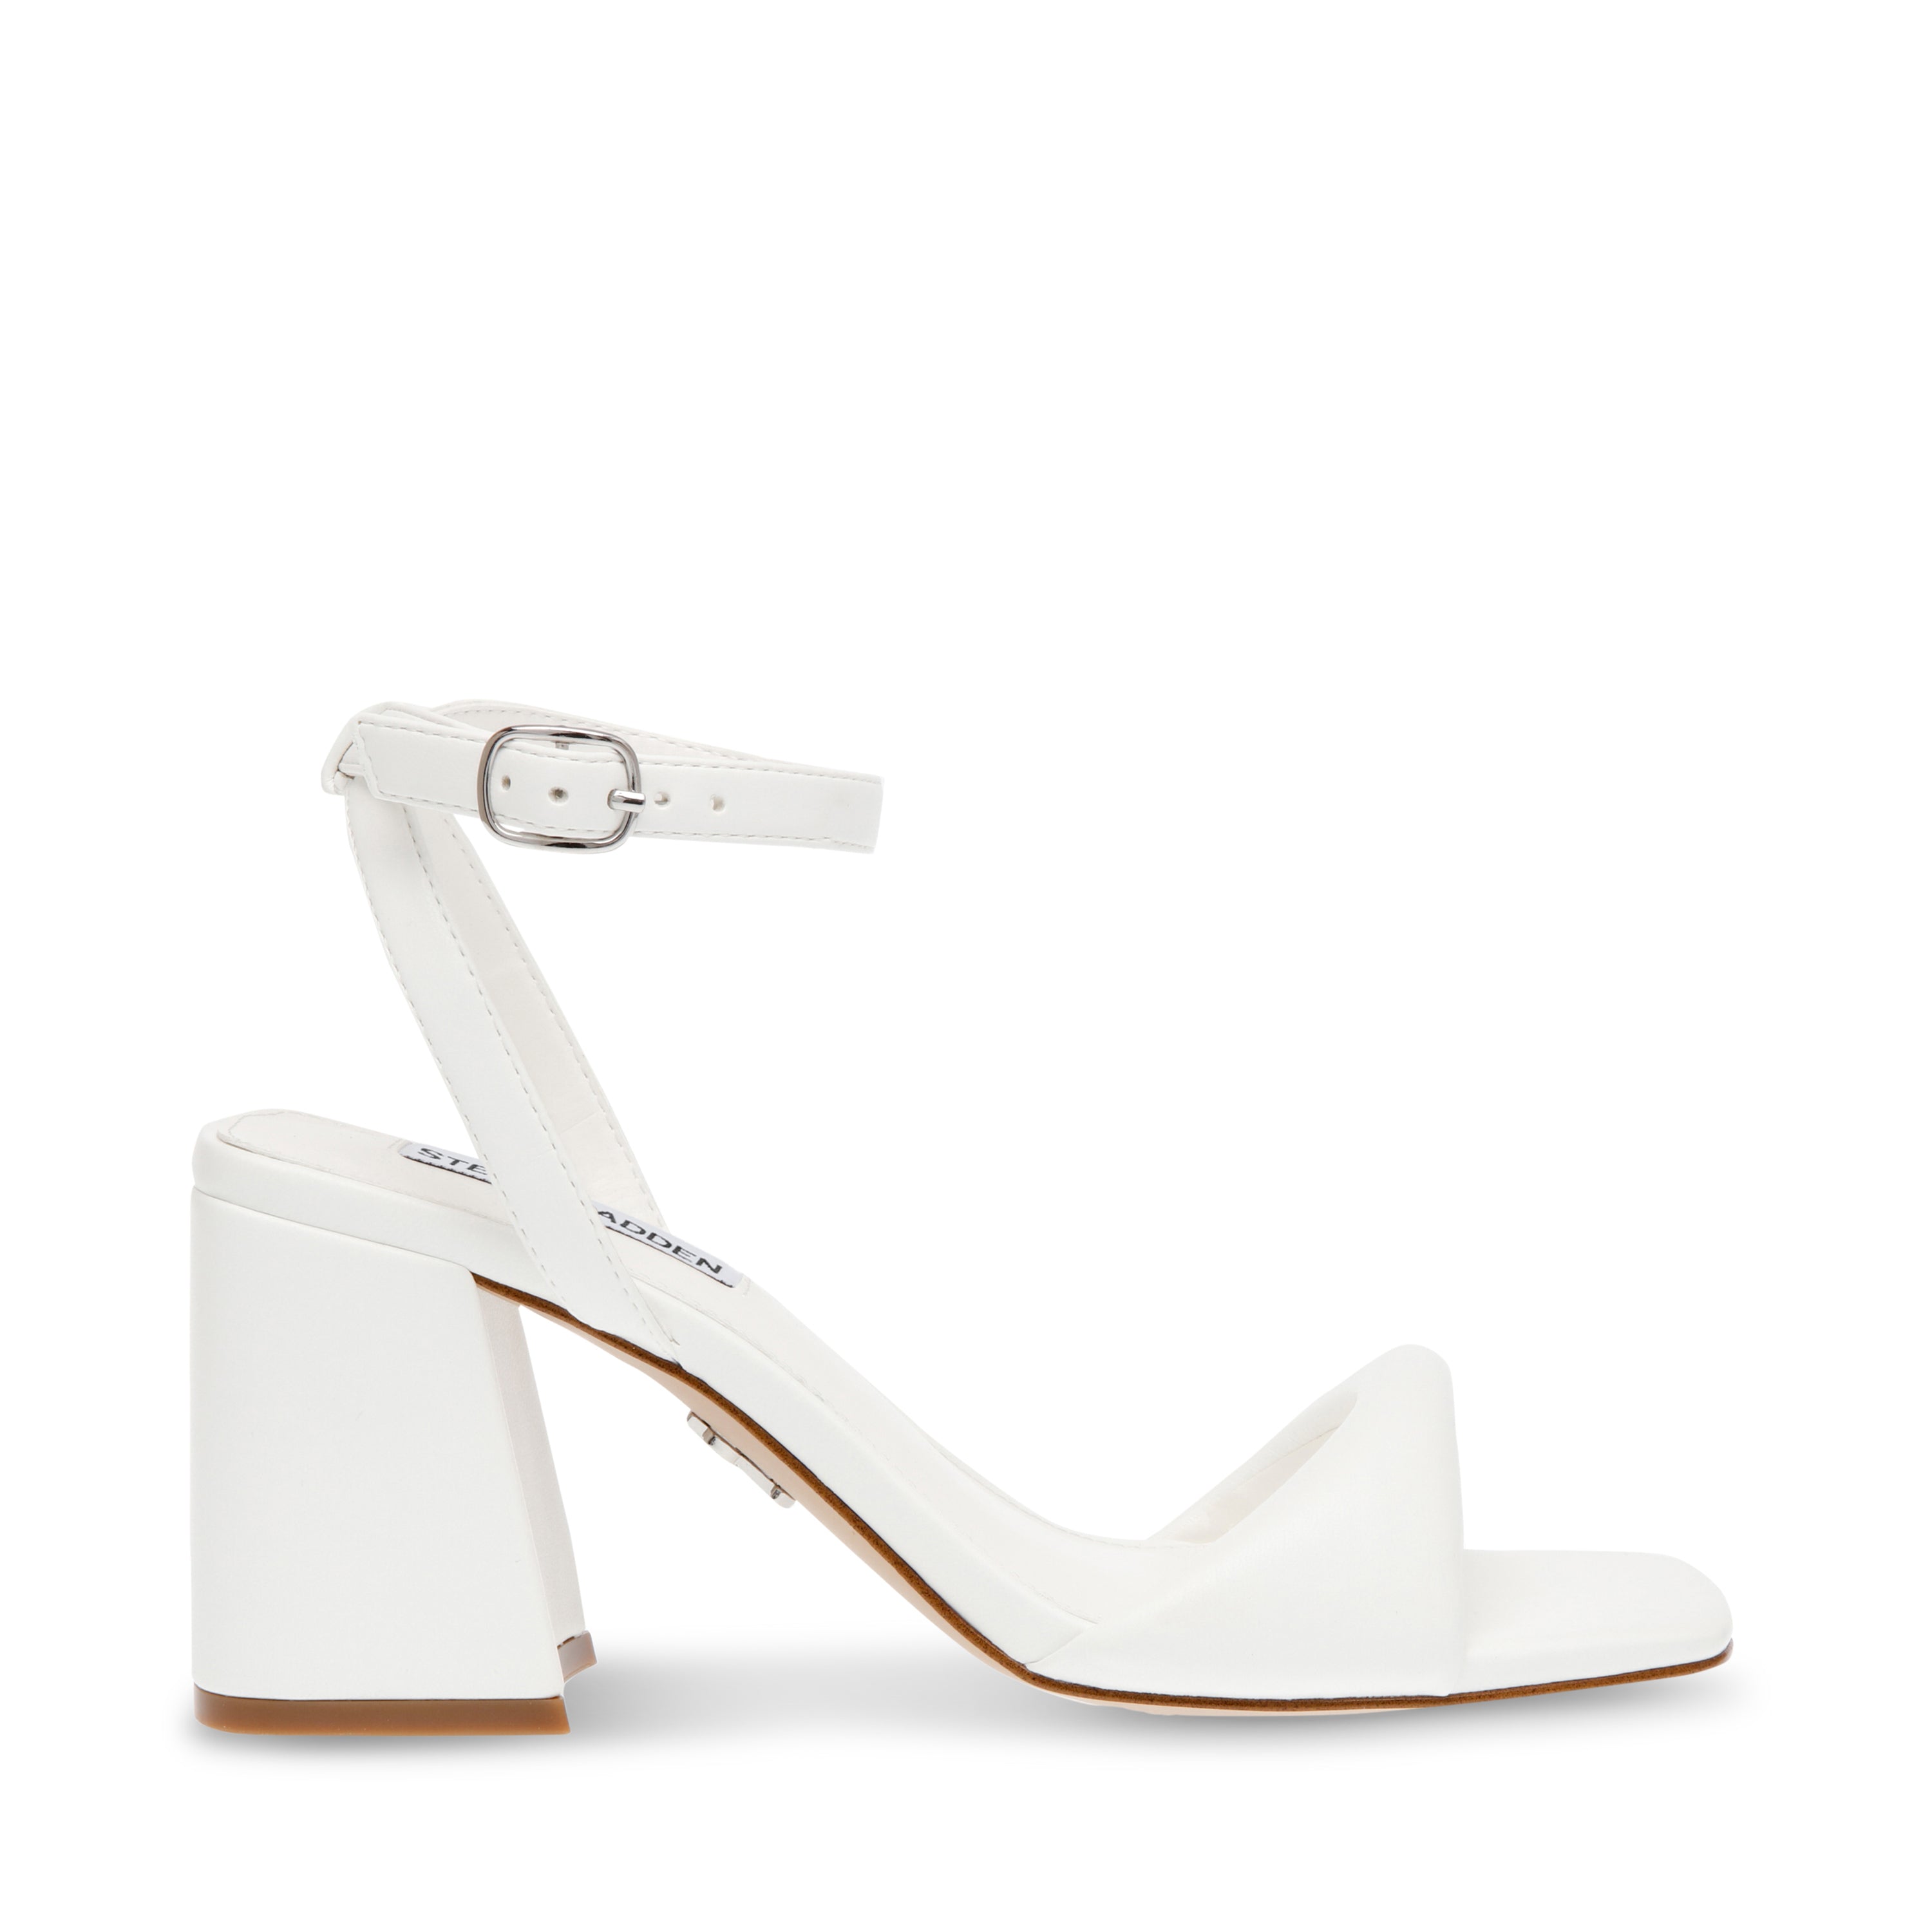 Buy Truffle Collection White Pu Ankle Strapped Block Heels Online